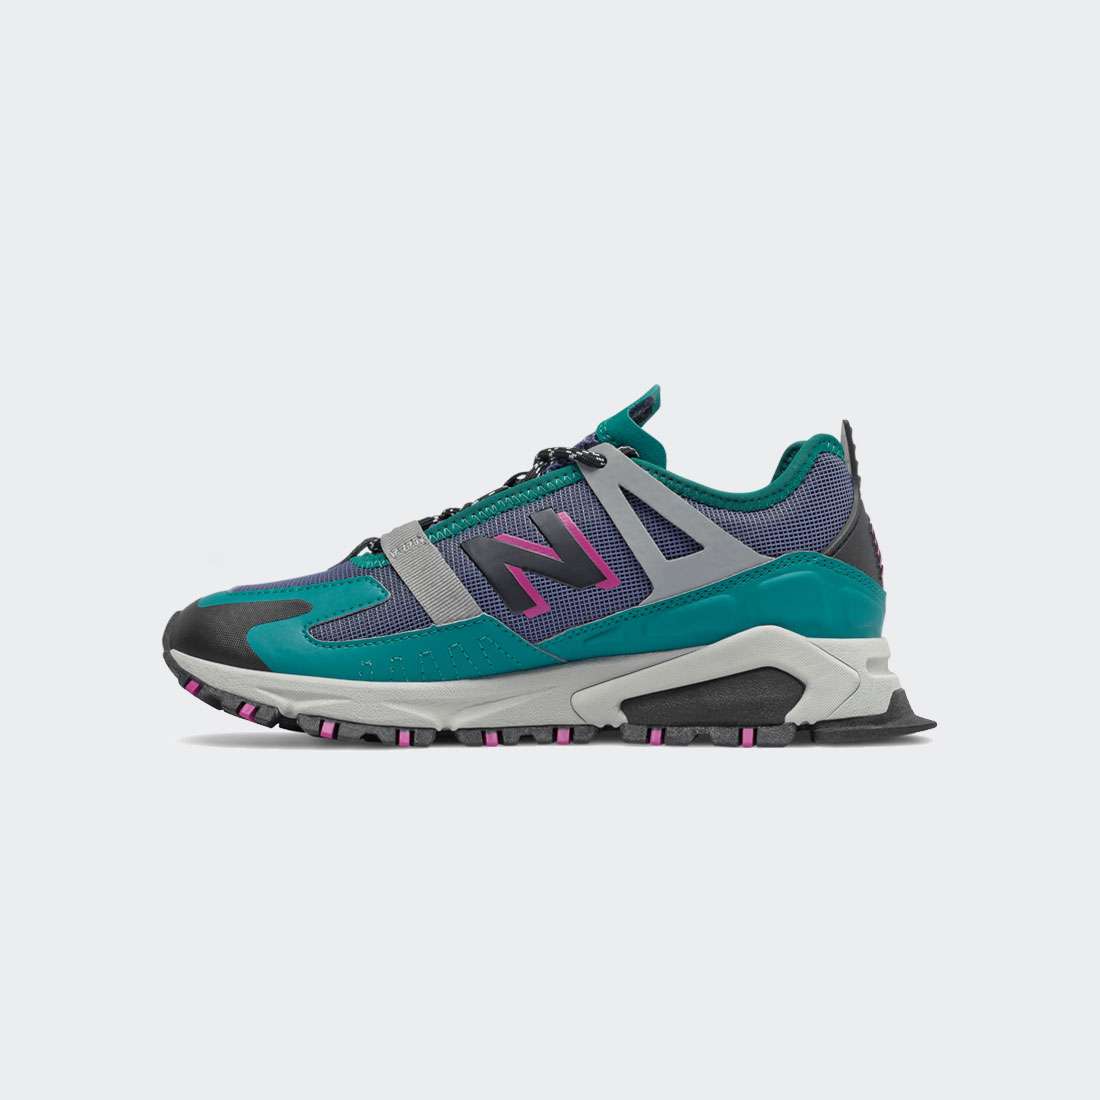 NEW BALANCE XRCT TEAM TEAL/MAGNETIC BLUE